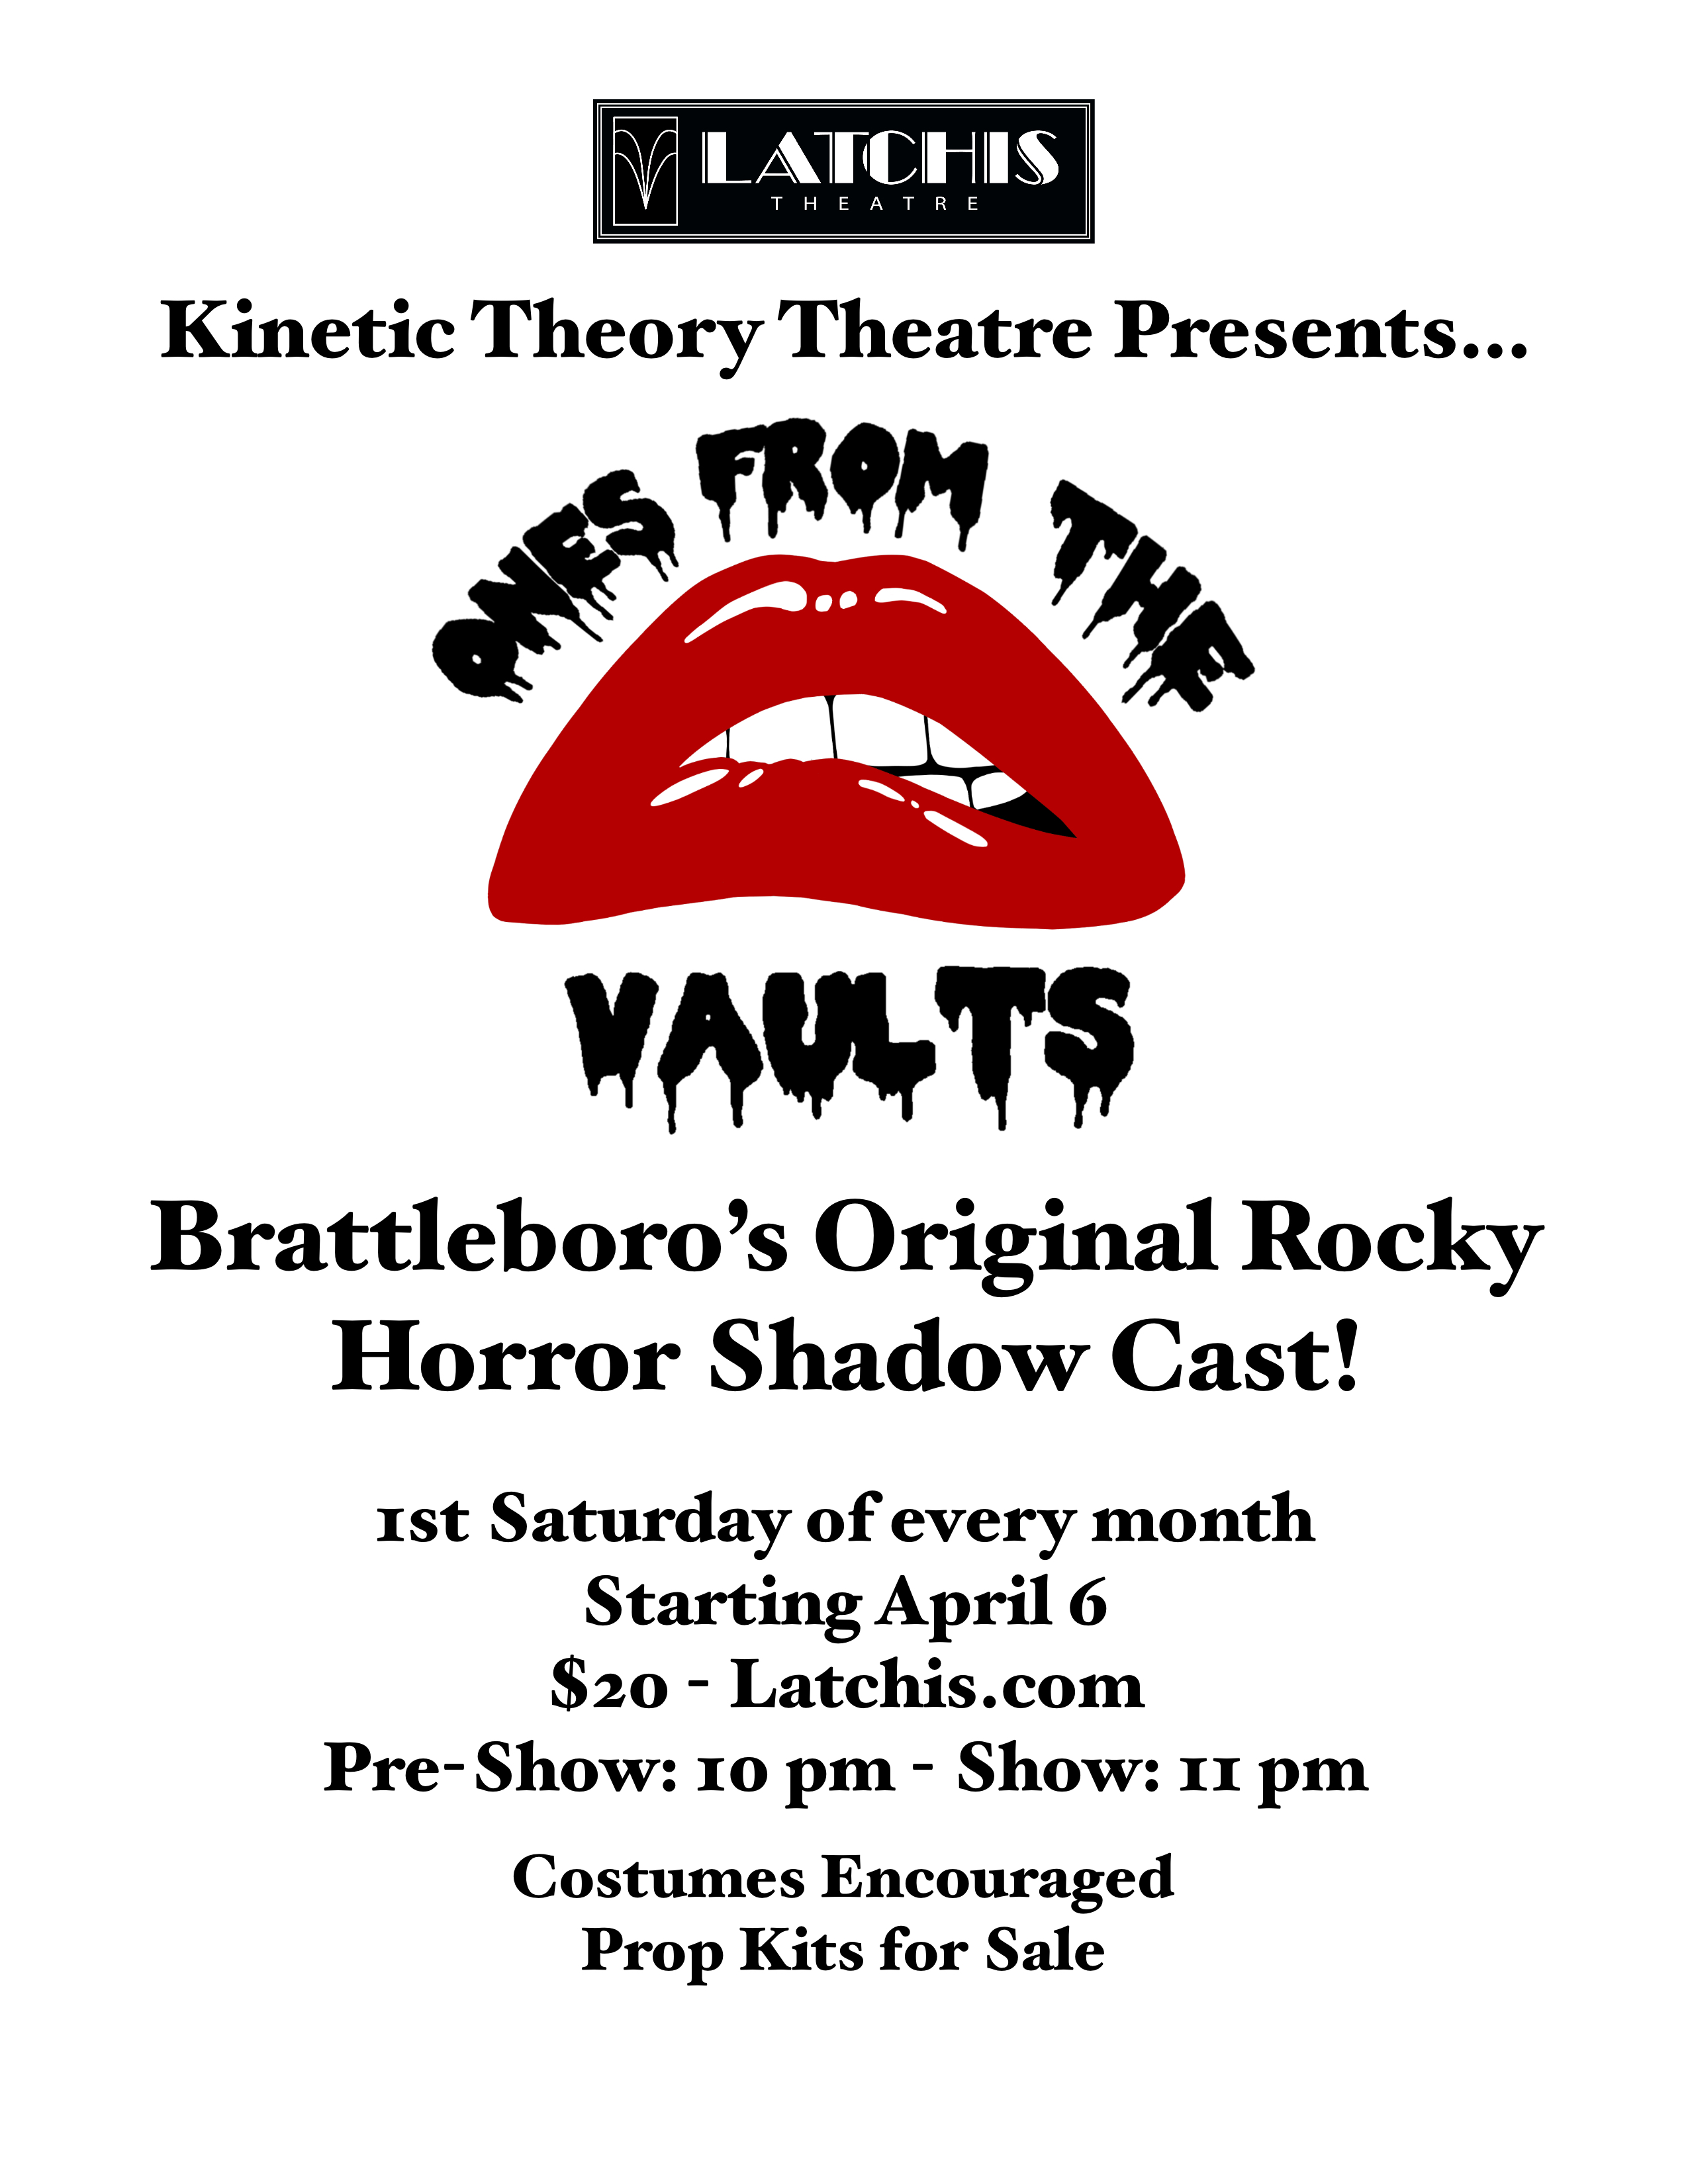 Kinetic Theory Theatre and The Latchis present Ones From the Vaults - Brattleboro’s Original Rocky Horror Shadow Cast – beginning Saturday, April 6, and continuing monthly on the first Saturday at the Latchis Theatre, 50 Main St., Brattleboro.